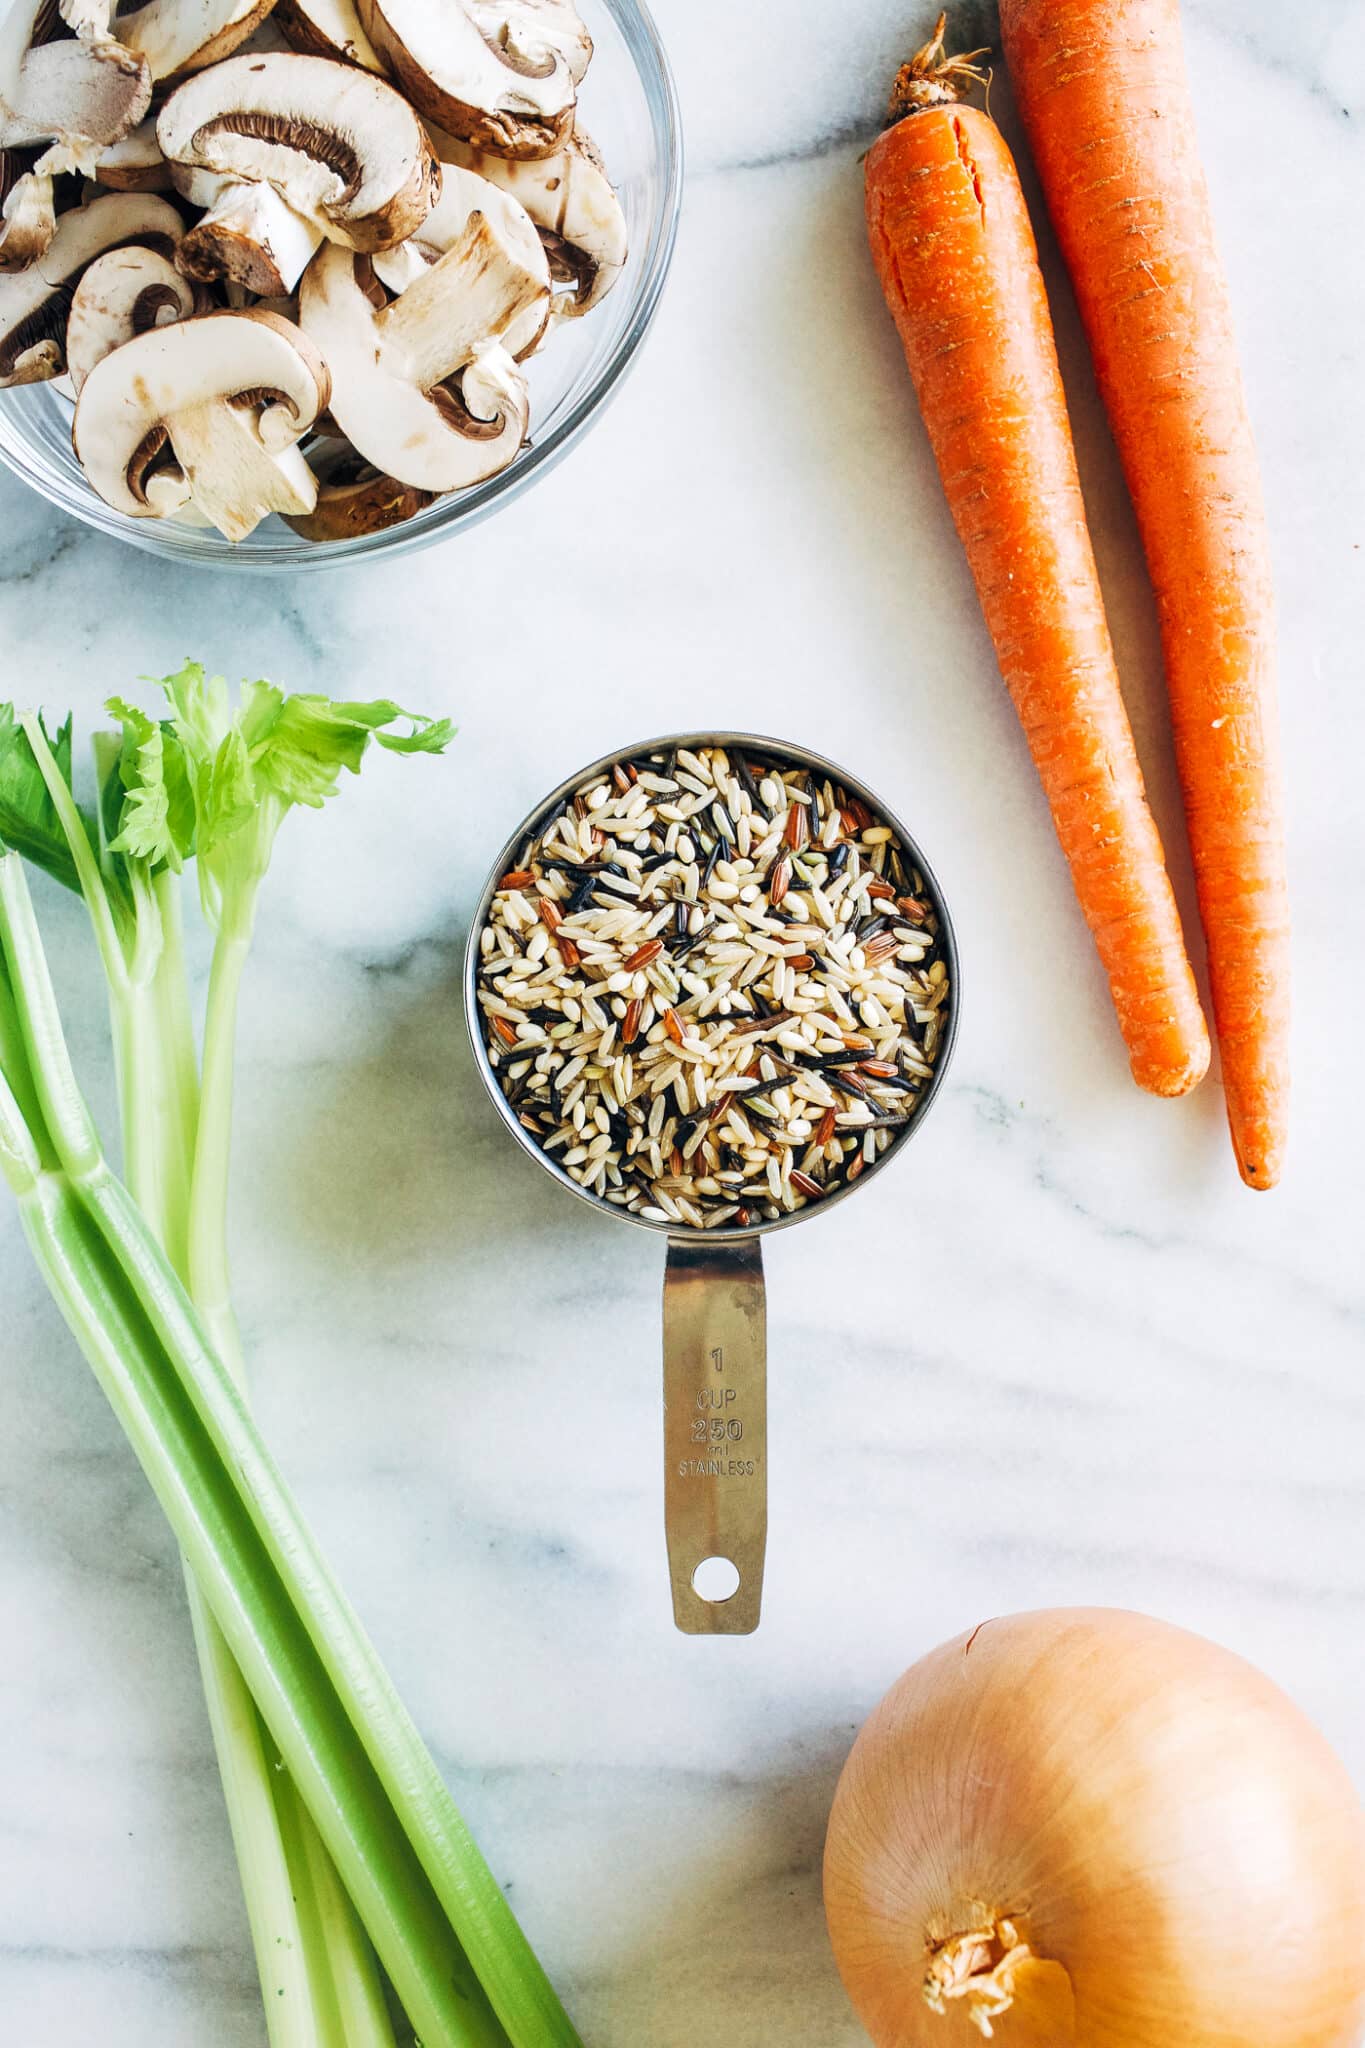 ingredients for making Creamy Wild Rice and Mushroom Casserole—bowl of sliced mushrooms, carrots, celery stalk, onion, and 1 cup measure full of wild rice